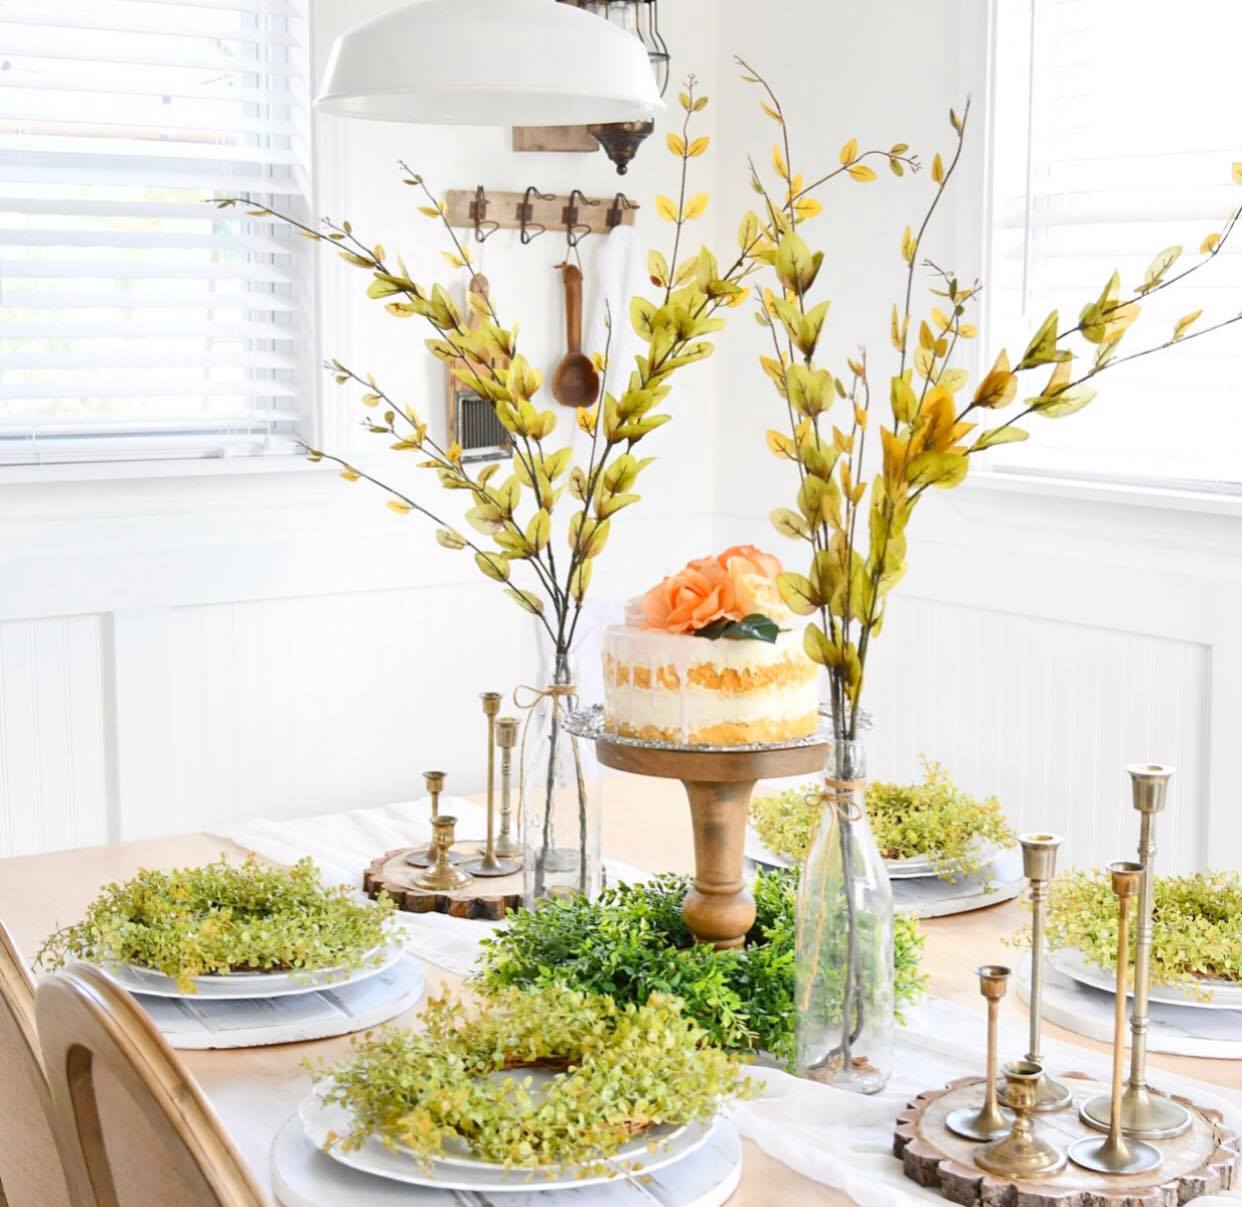 How to Create a Summer Tablescape That Wows